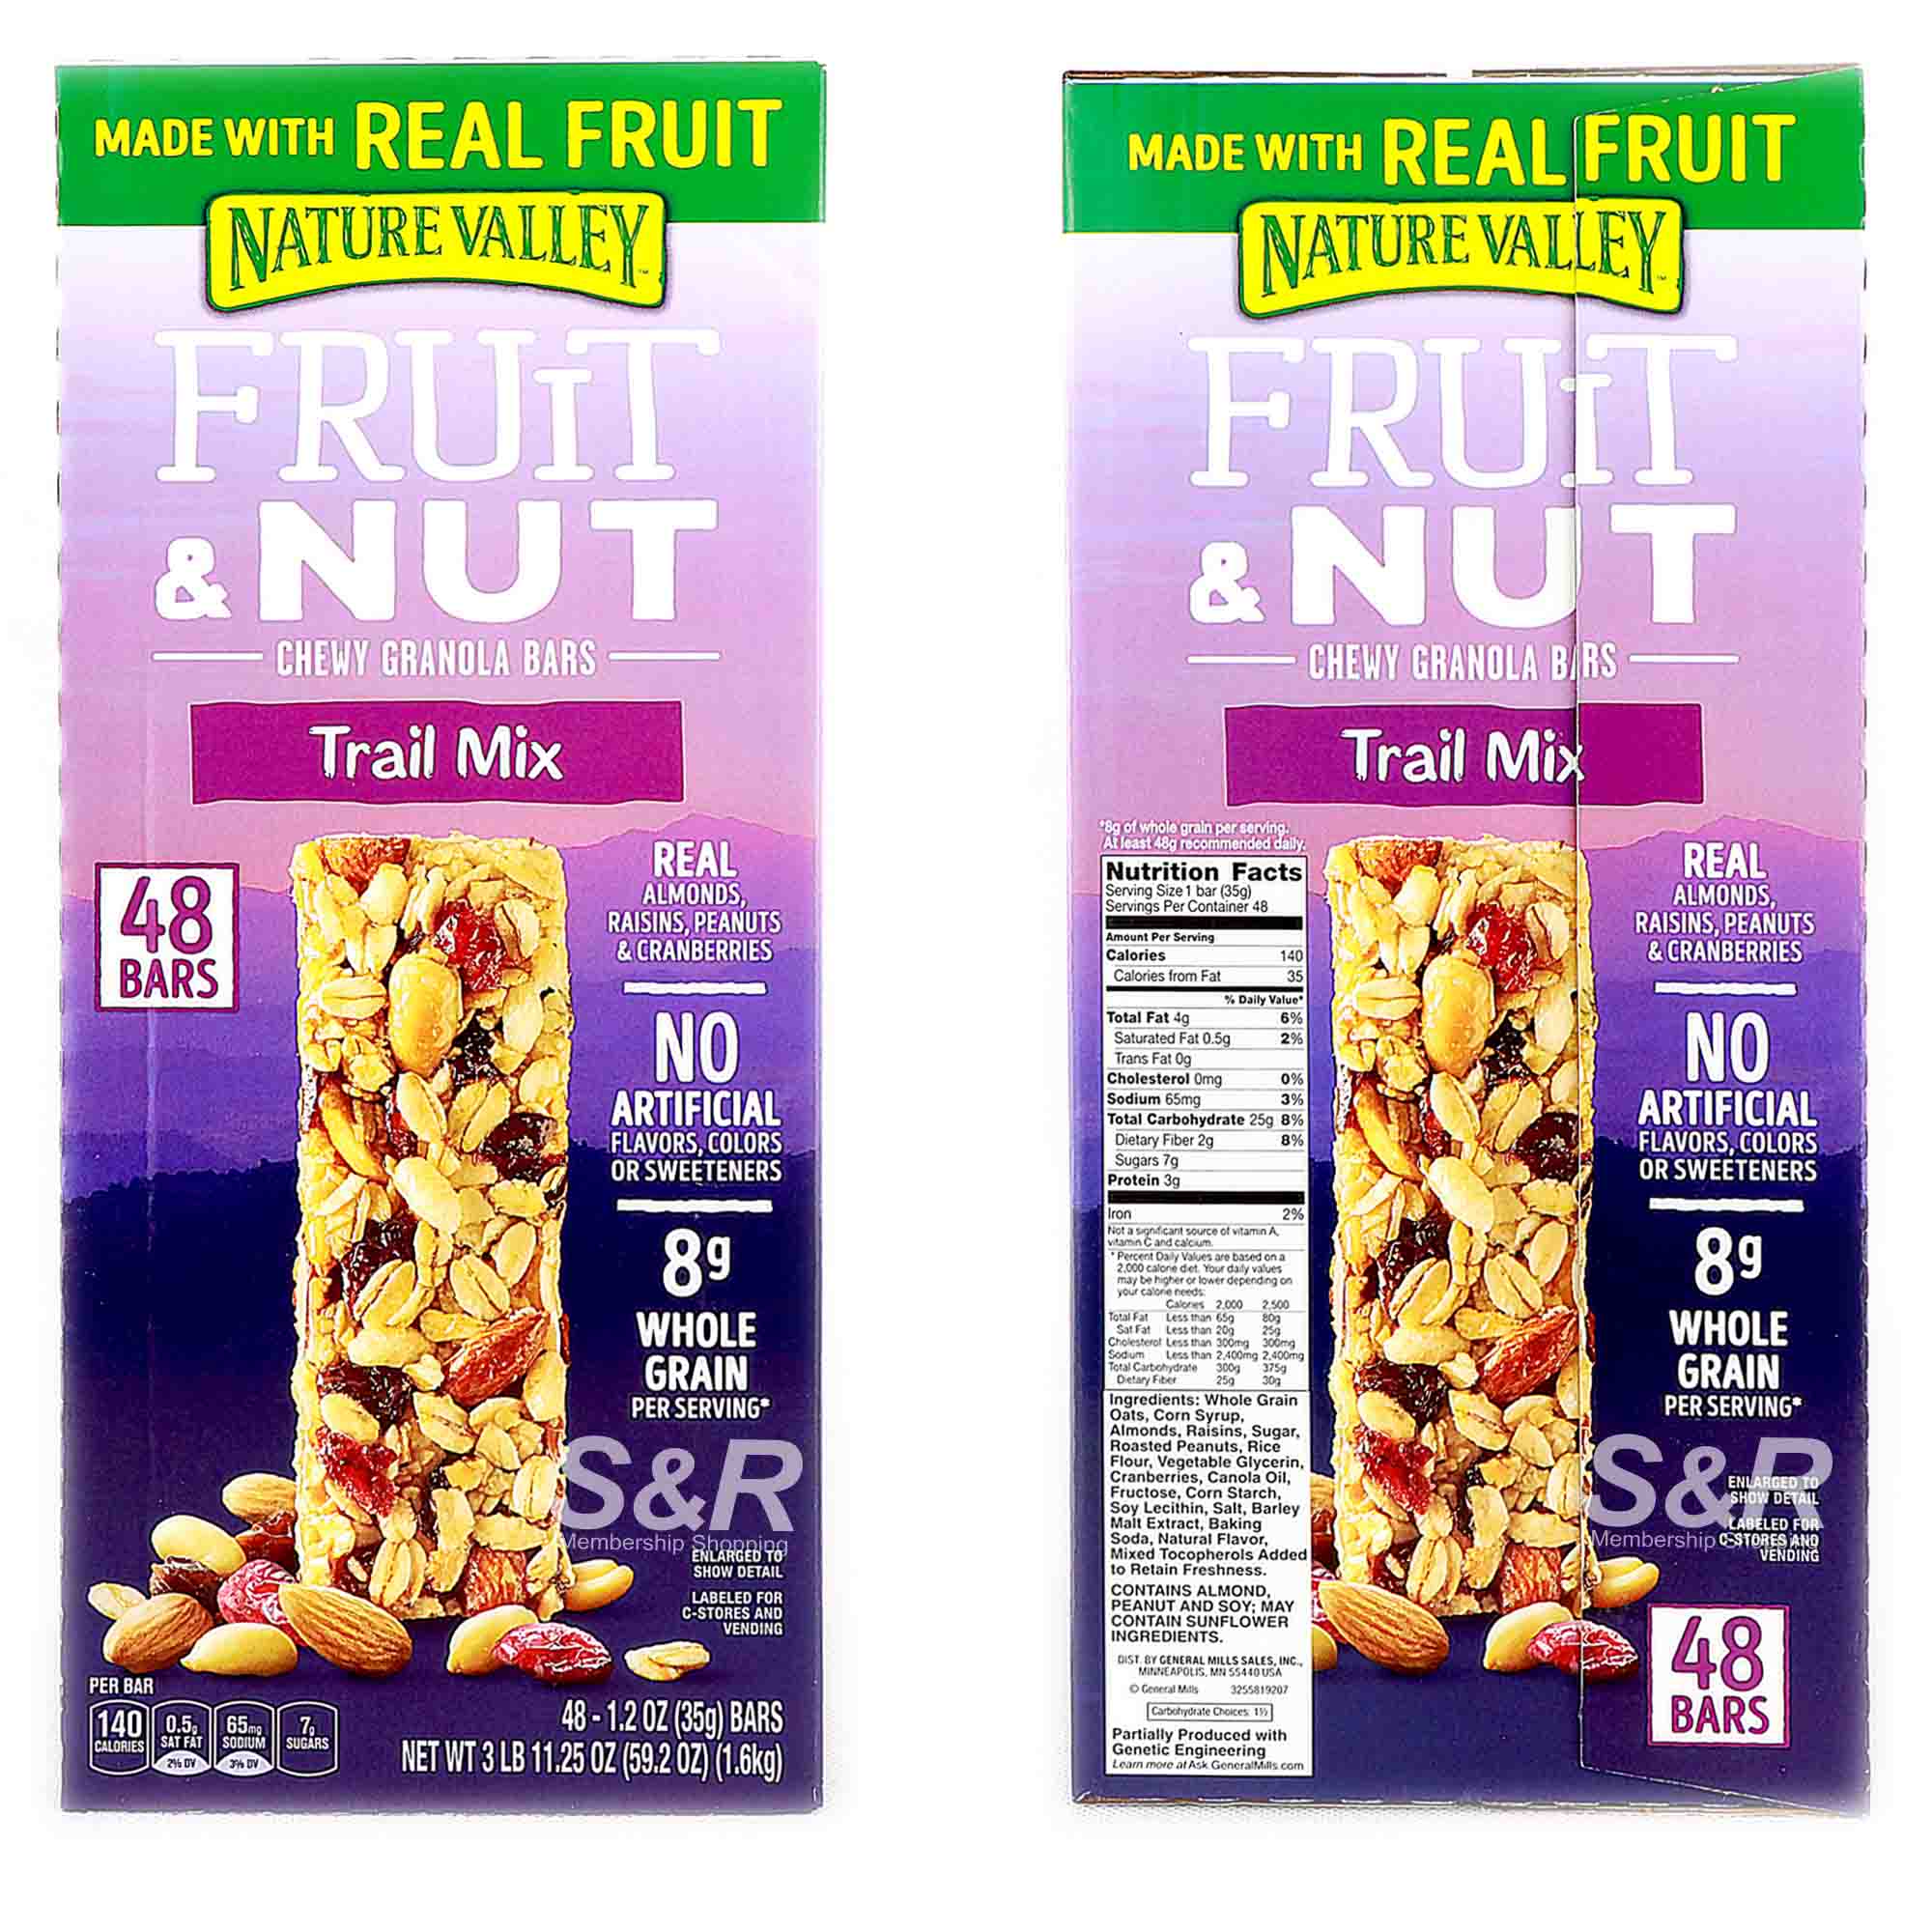 Nature Valley products » Compare prices and see offers now